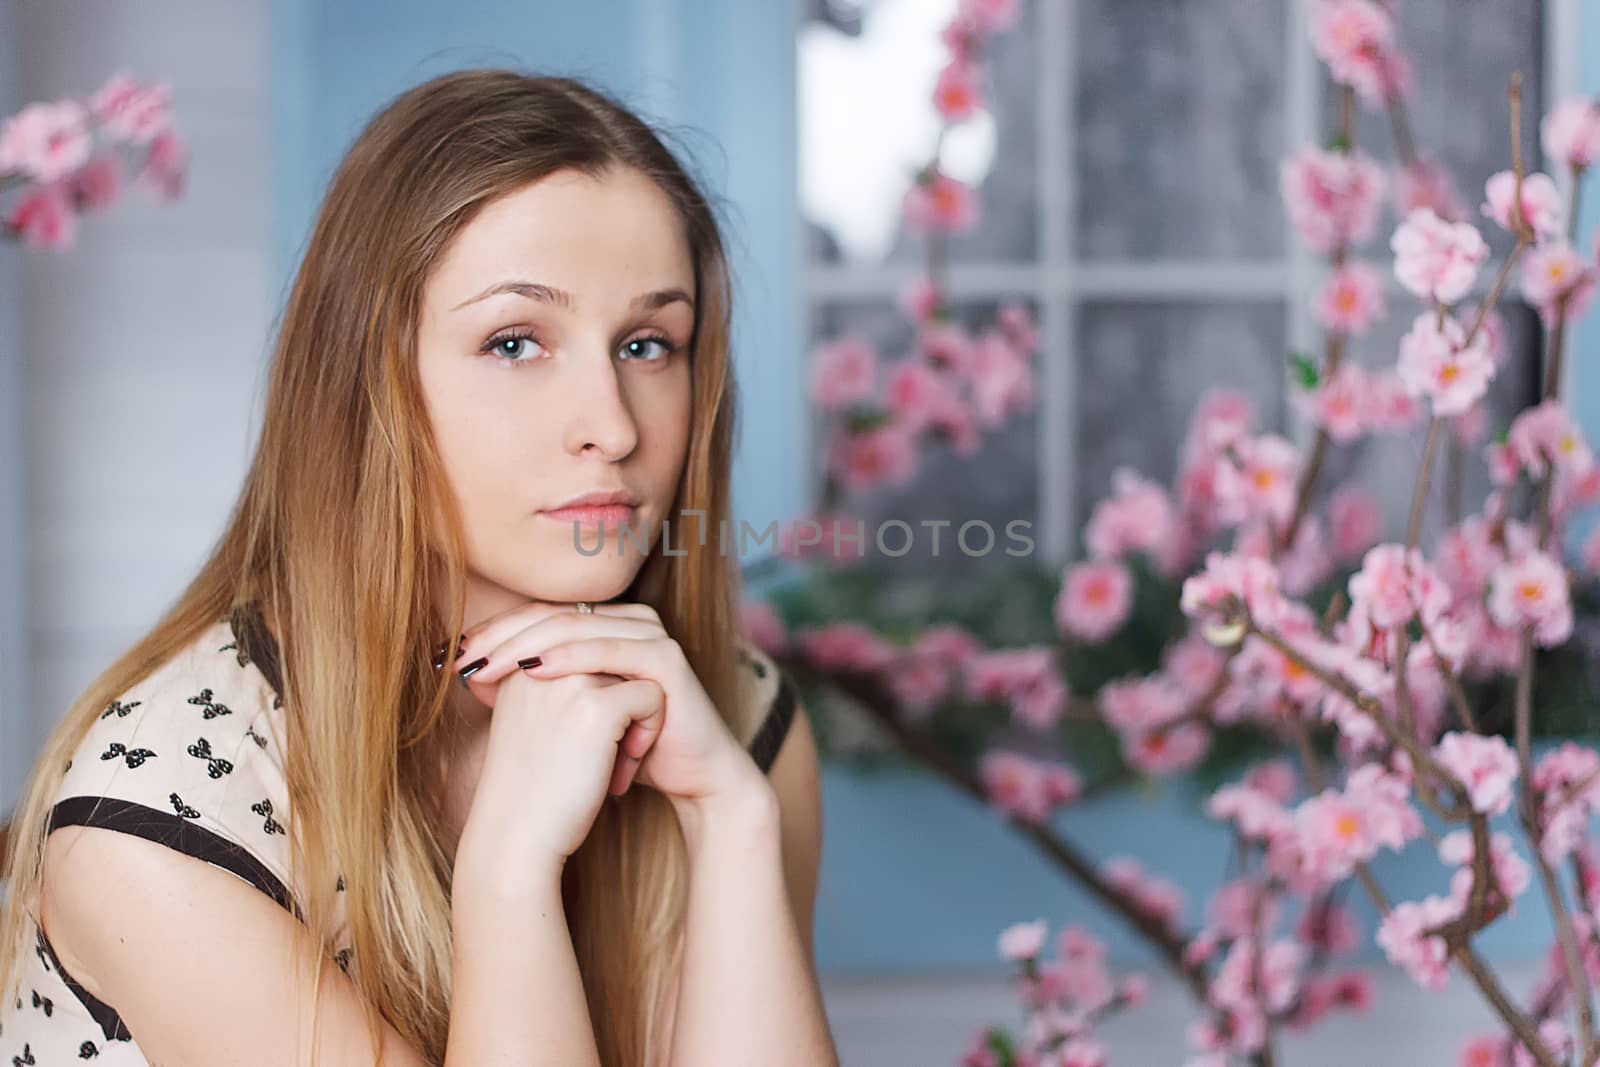 Beautiful girl with long hair in flowering garden by victosha